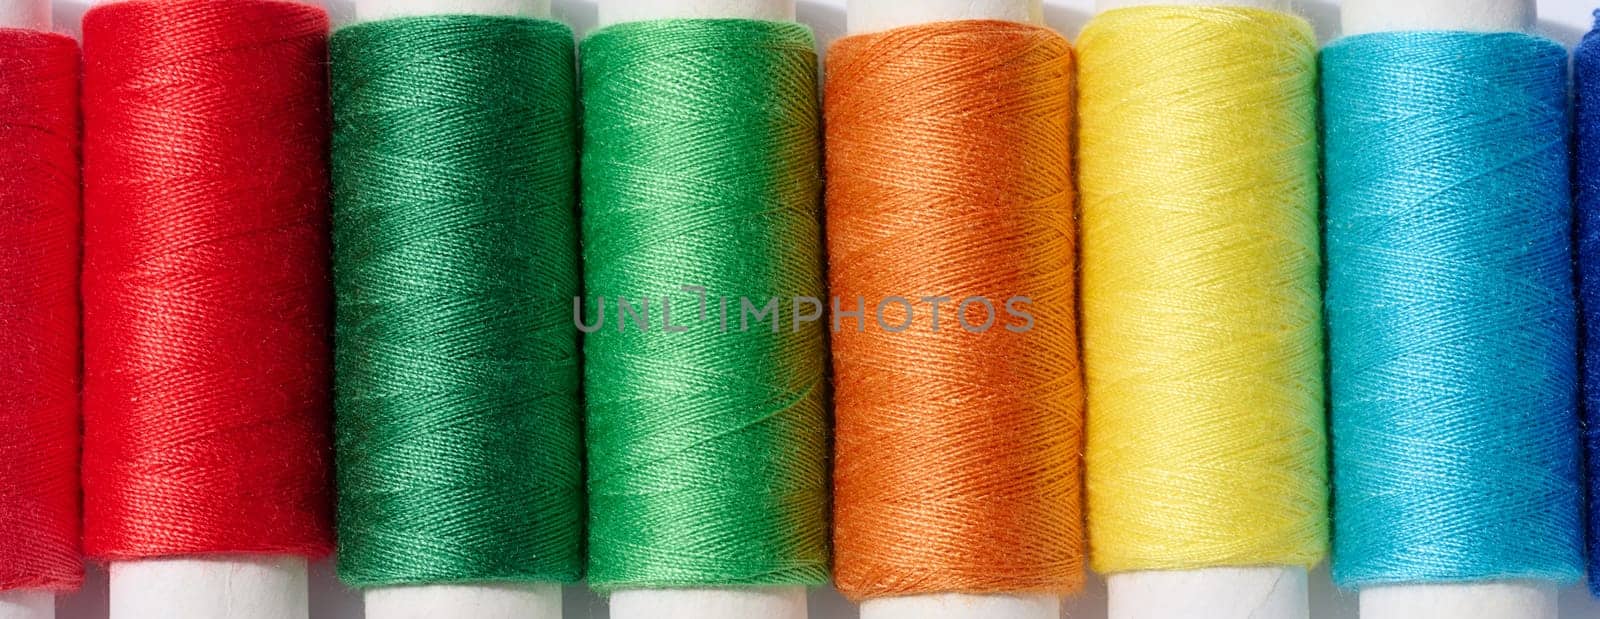 Multicolored spools of sewing threads on a white background, top view by ndanko